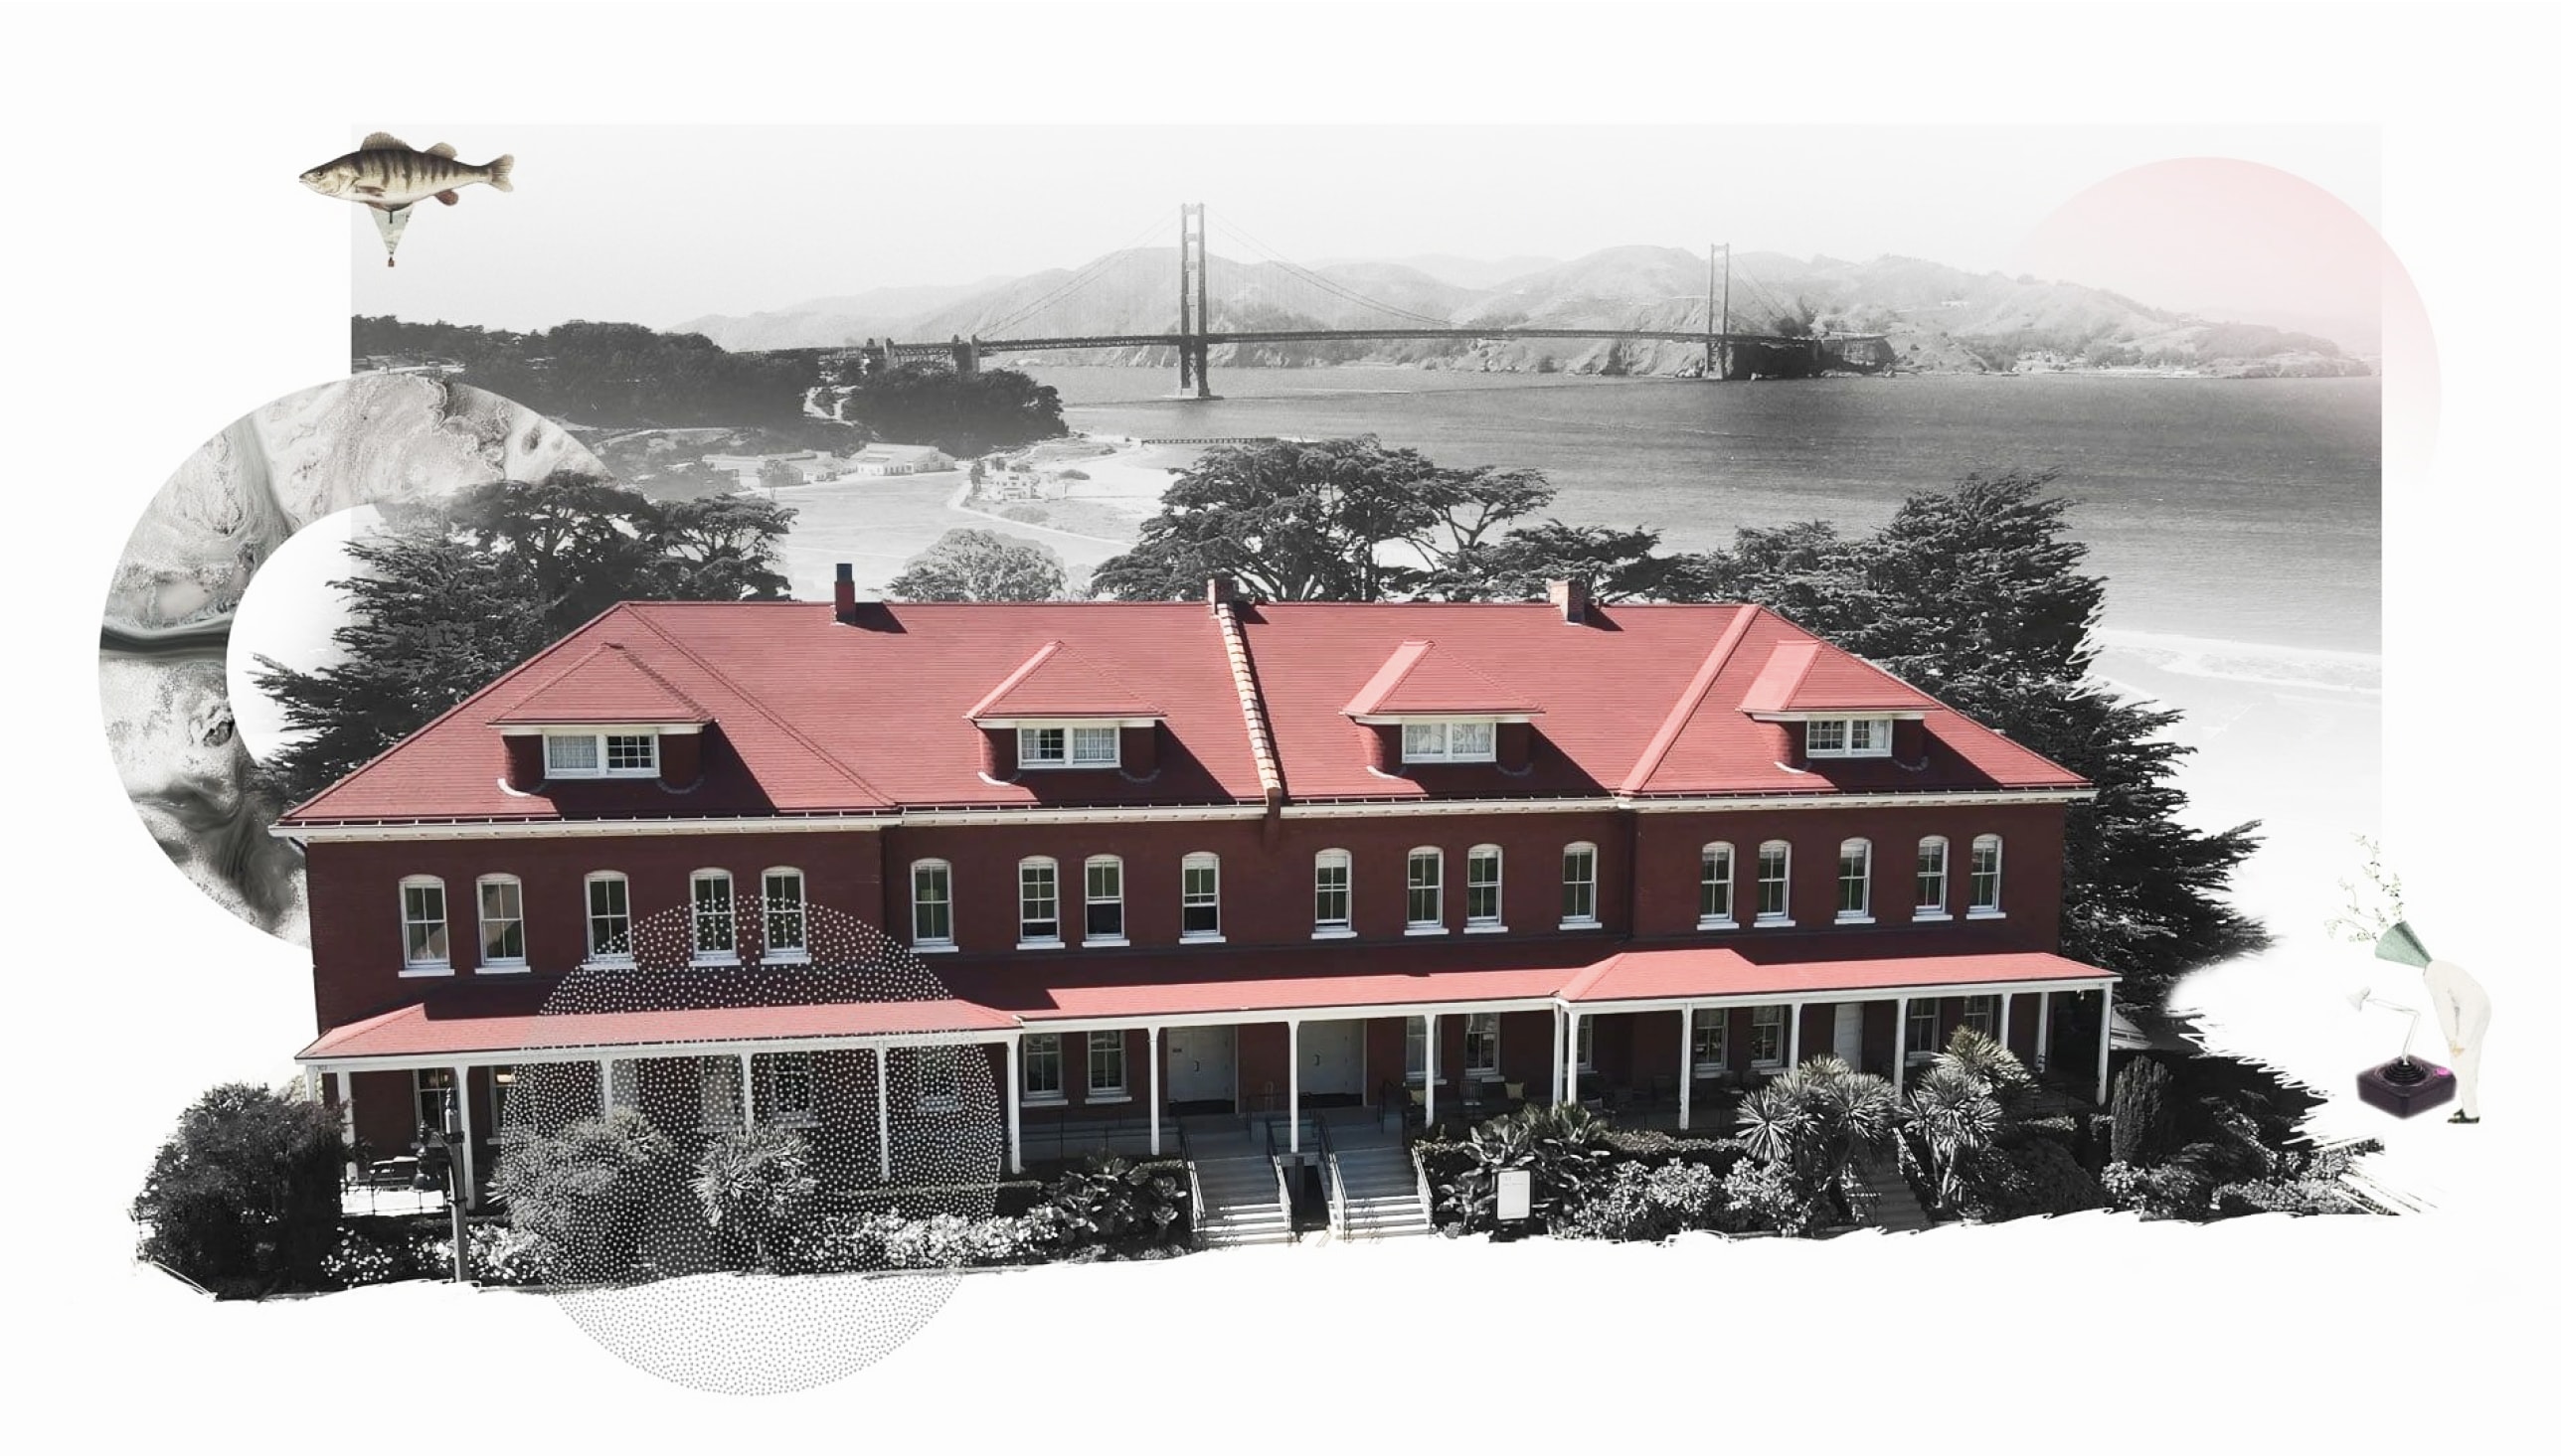 Exterior of the House of Web3, with the Golden Gate Bridge in the background